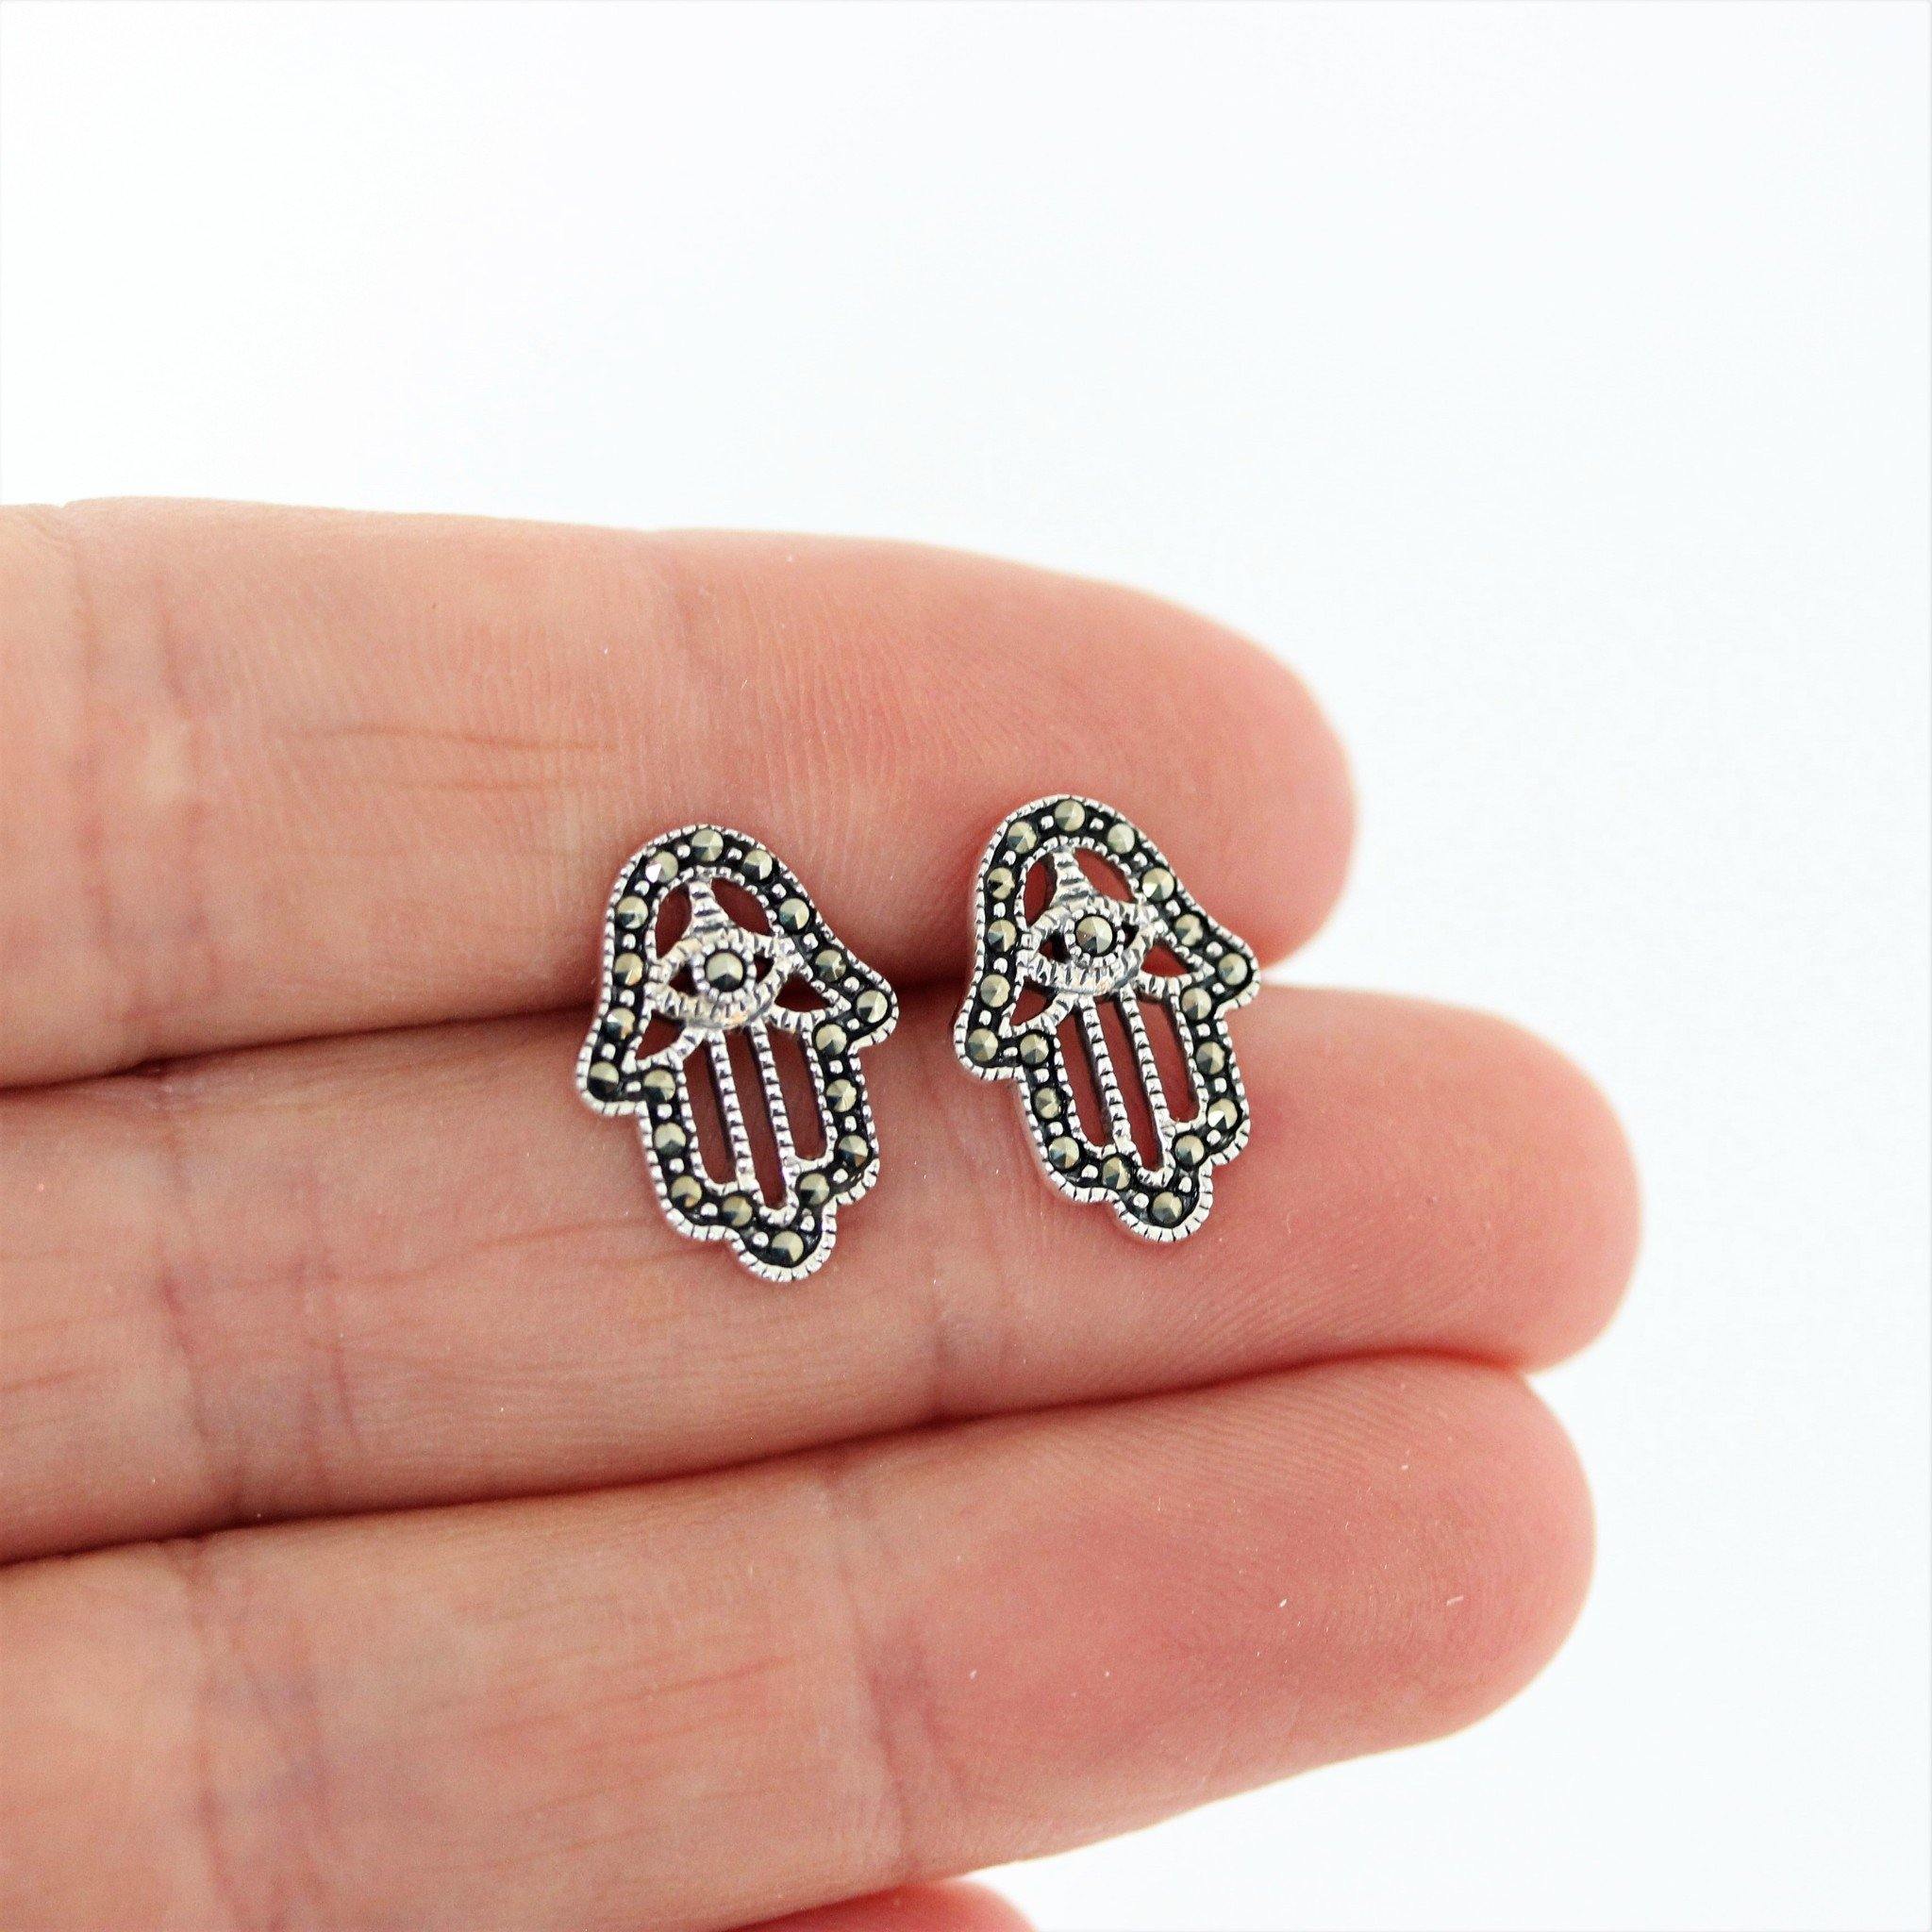 Sterling Silver 925 Marcasite Vintage Style Cut Out Hamsa Hand Stud Earrings - STERLING SILVER DESIGNS